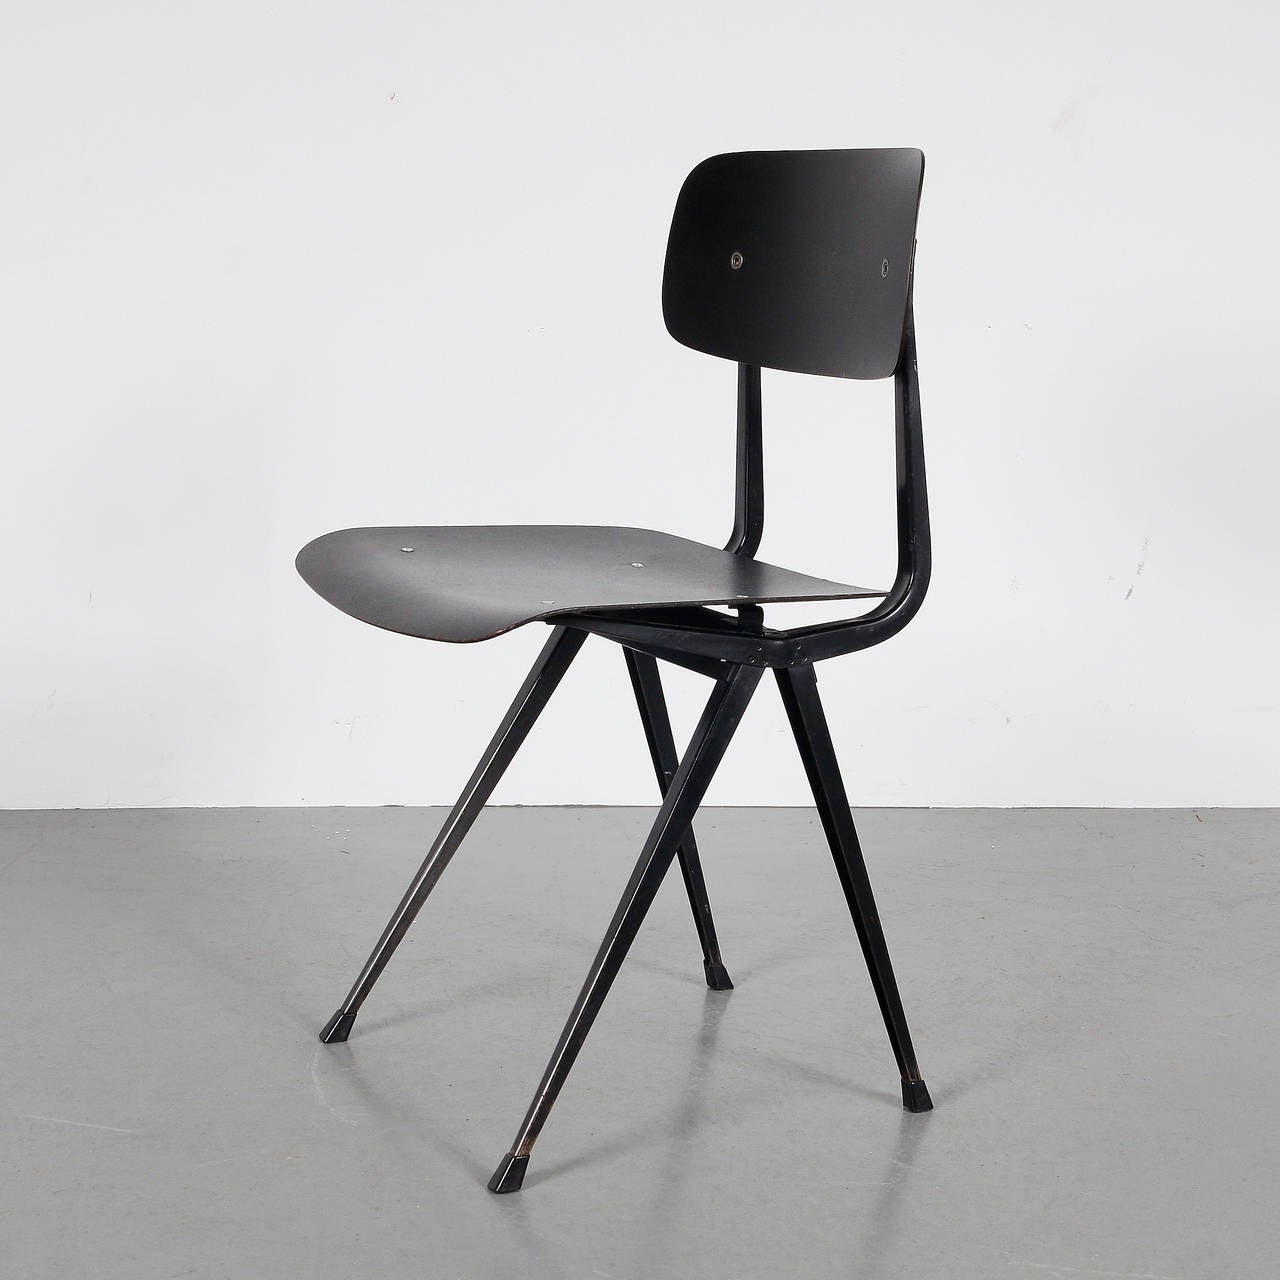 Chair, model Result, designed by Friso Kramer in collaboration with Wim Rietveld in 1958.

Manufactured by Ahrend de Cirkel (Netherlands) in 1958.
Profiled sheet lacquered metal.

In good original condition, with minor wear consistent with age